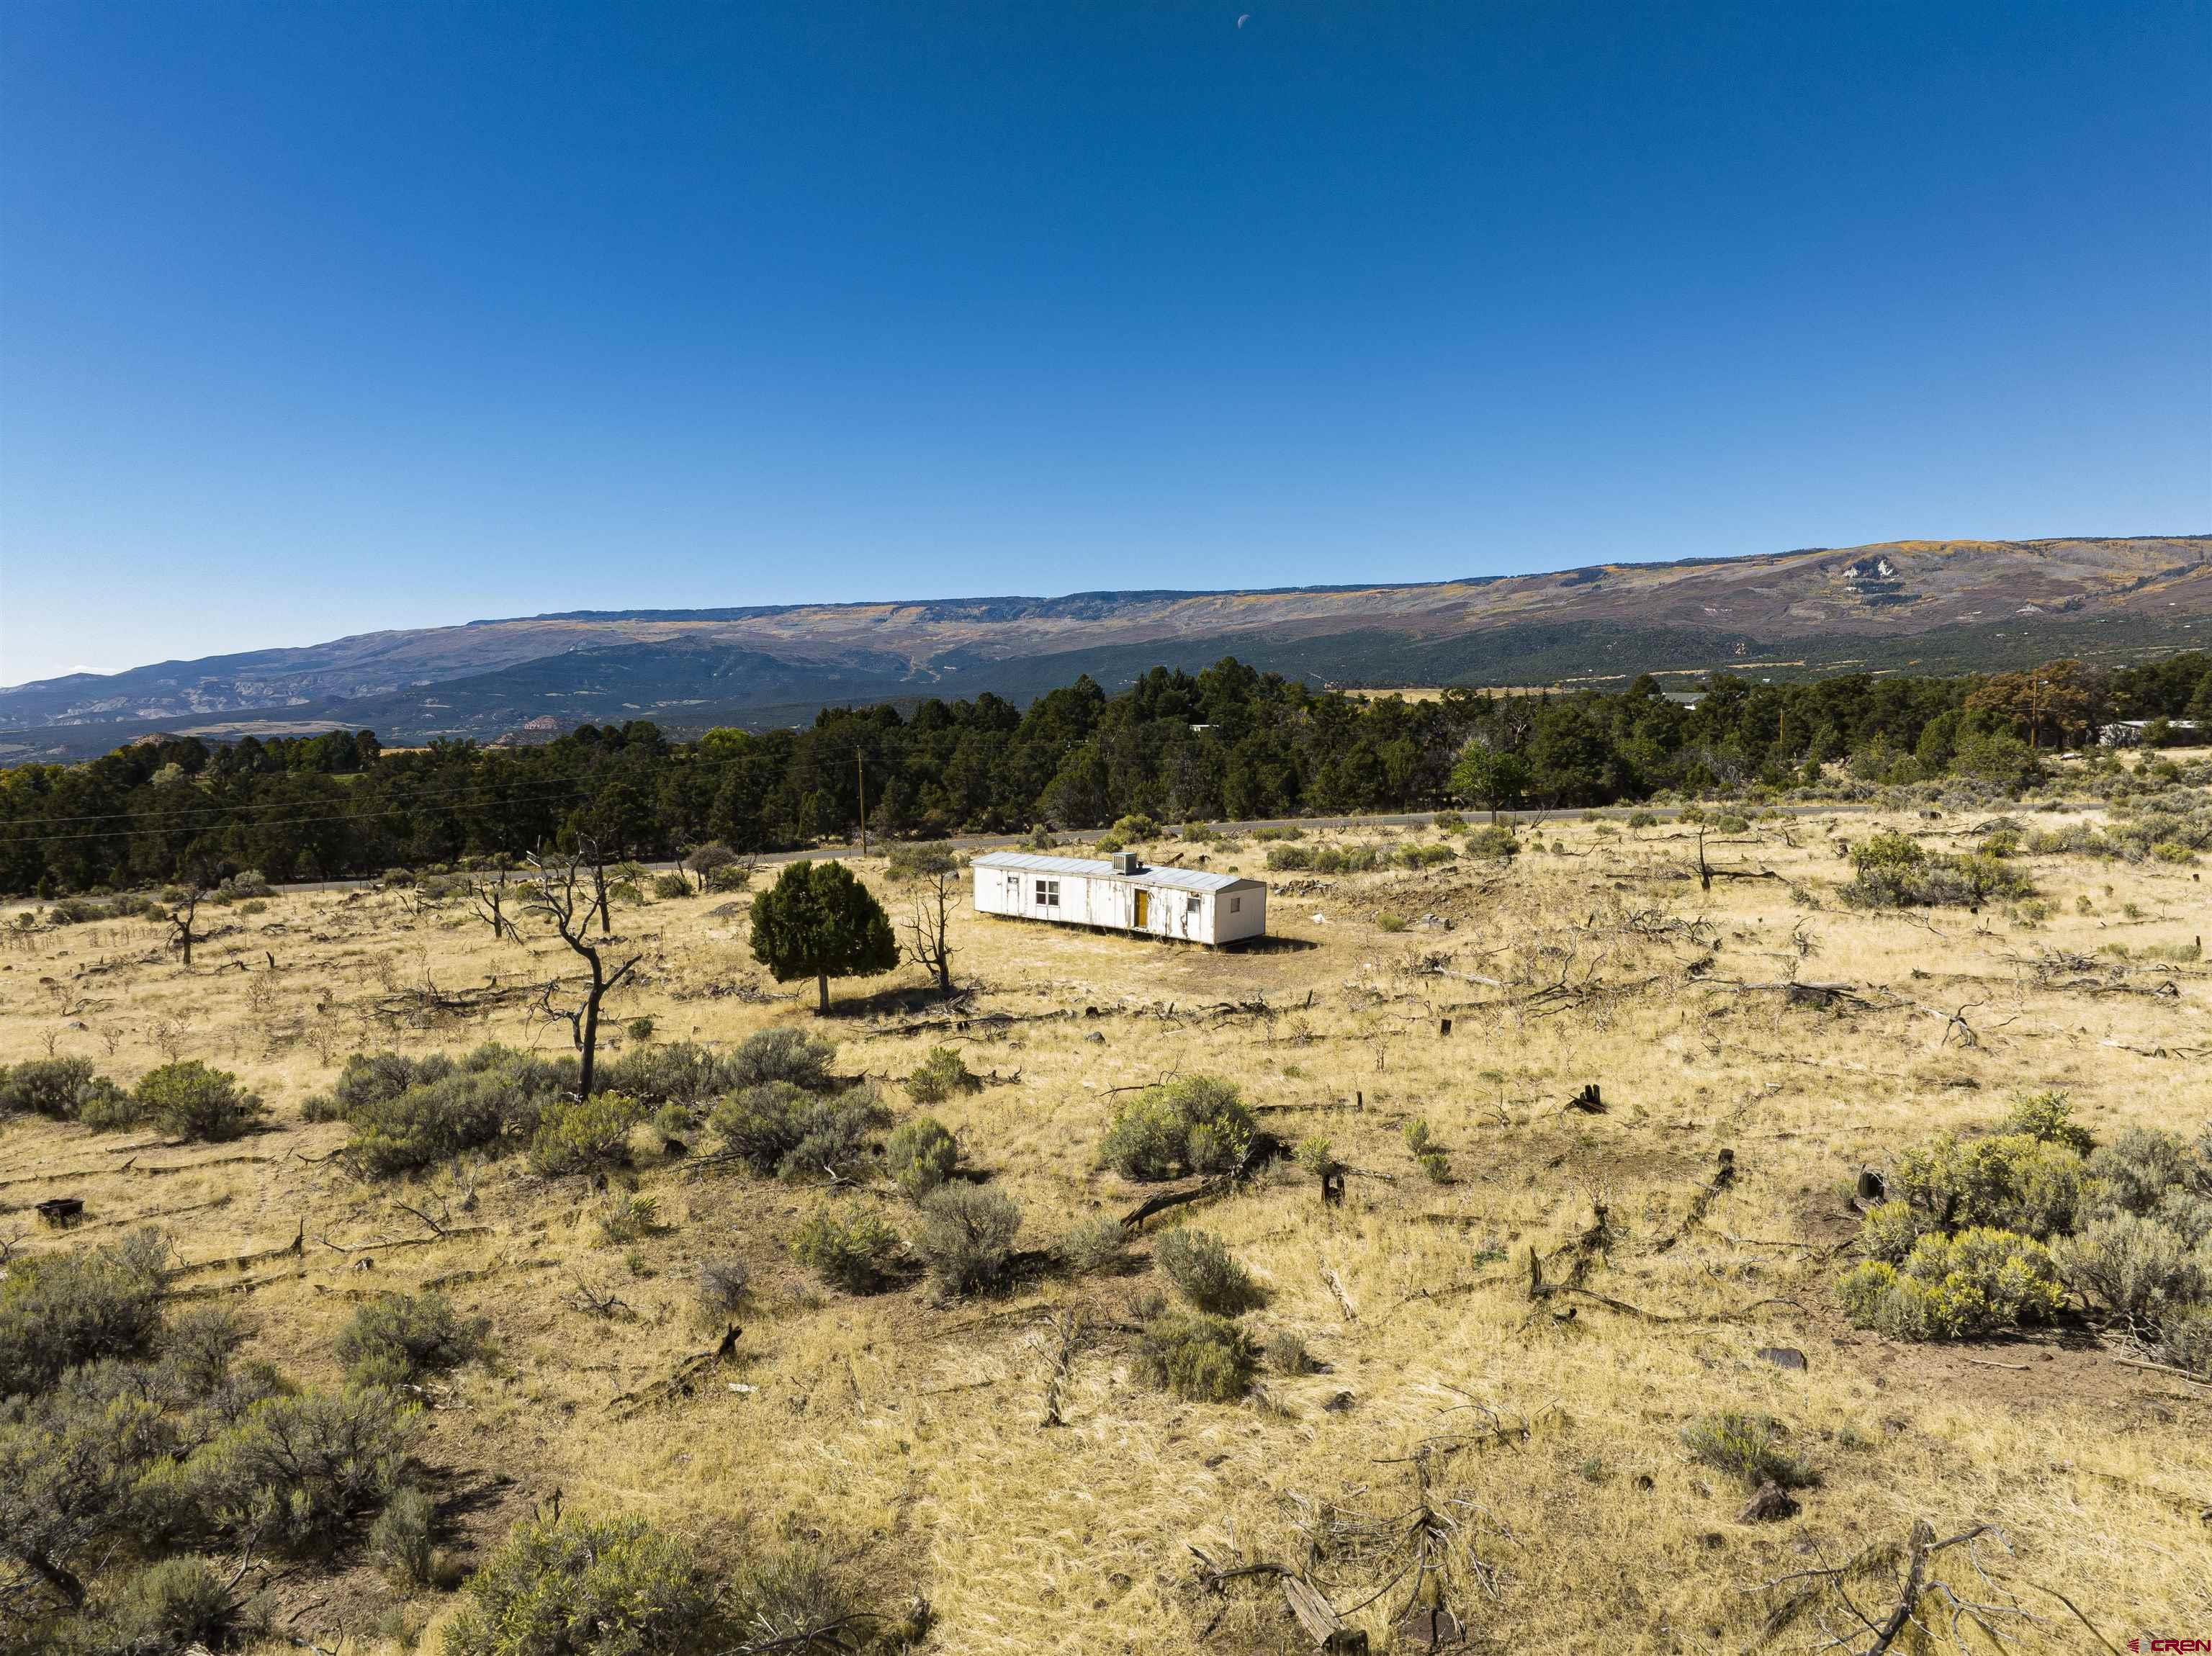 Come check out this 5 acre build site up surface creek rd. Views of the Grand Mesa as well as expansive views of the San Juans. You can even see the Fruit Growers Reservoir from this property. There is a leveled pad that has a mobile home sitting on it. Mobile is a 1986 Park Ridge / Champion 14x56 Serial # 4268385984. There is no water tap and nothing hooked to the mobile. Buyer to research about water tap availability and cost. Property and mobile are sold as is.